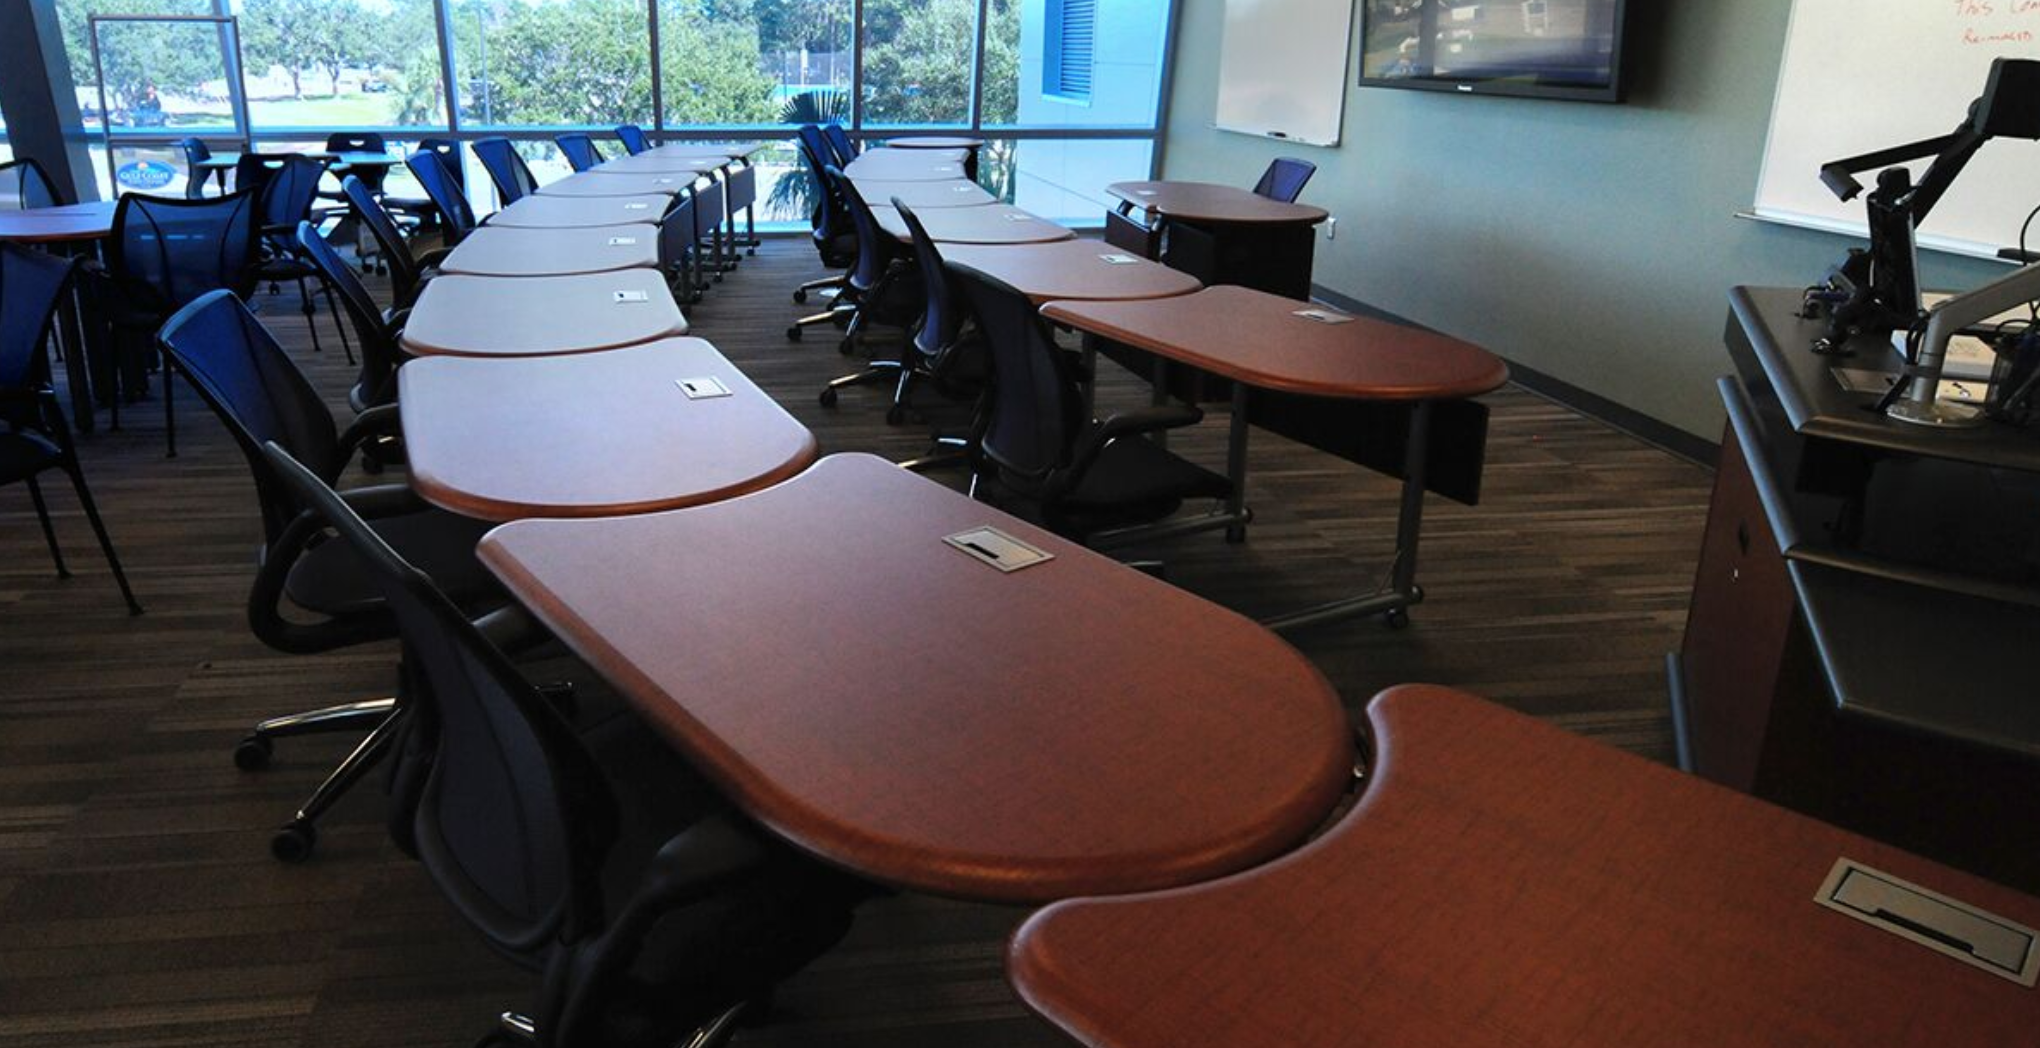 Custom Collaboration Learning Tables For The Classroom from SMARTdesks 800-770-7042